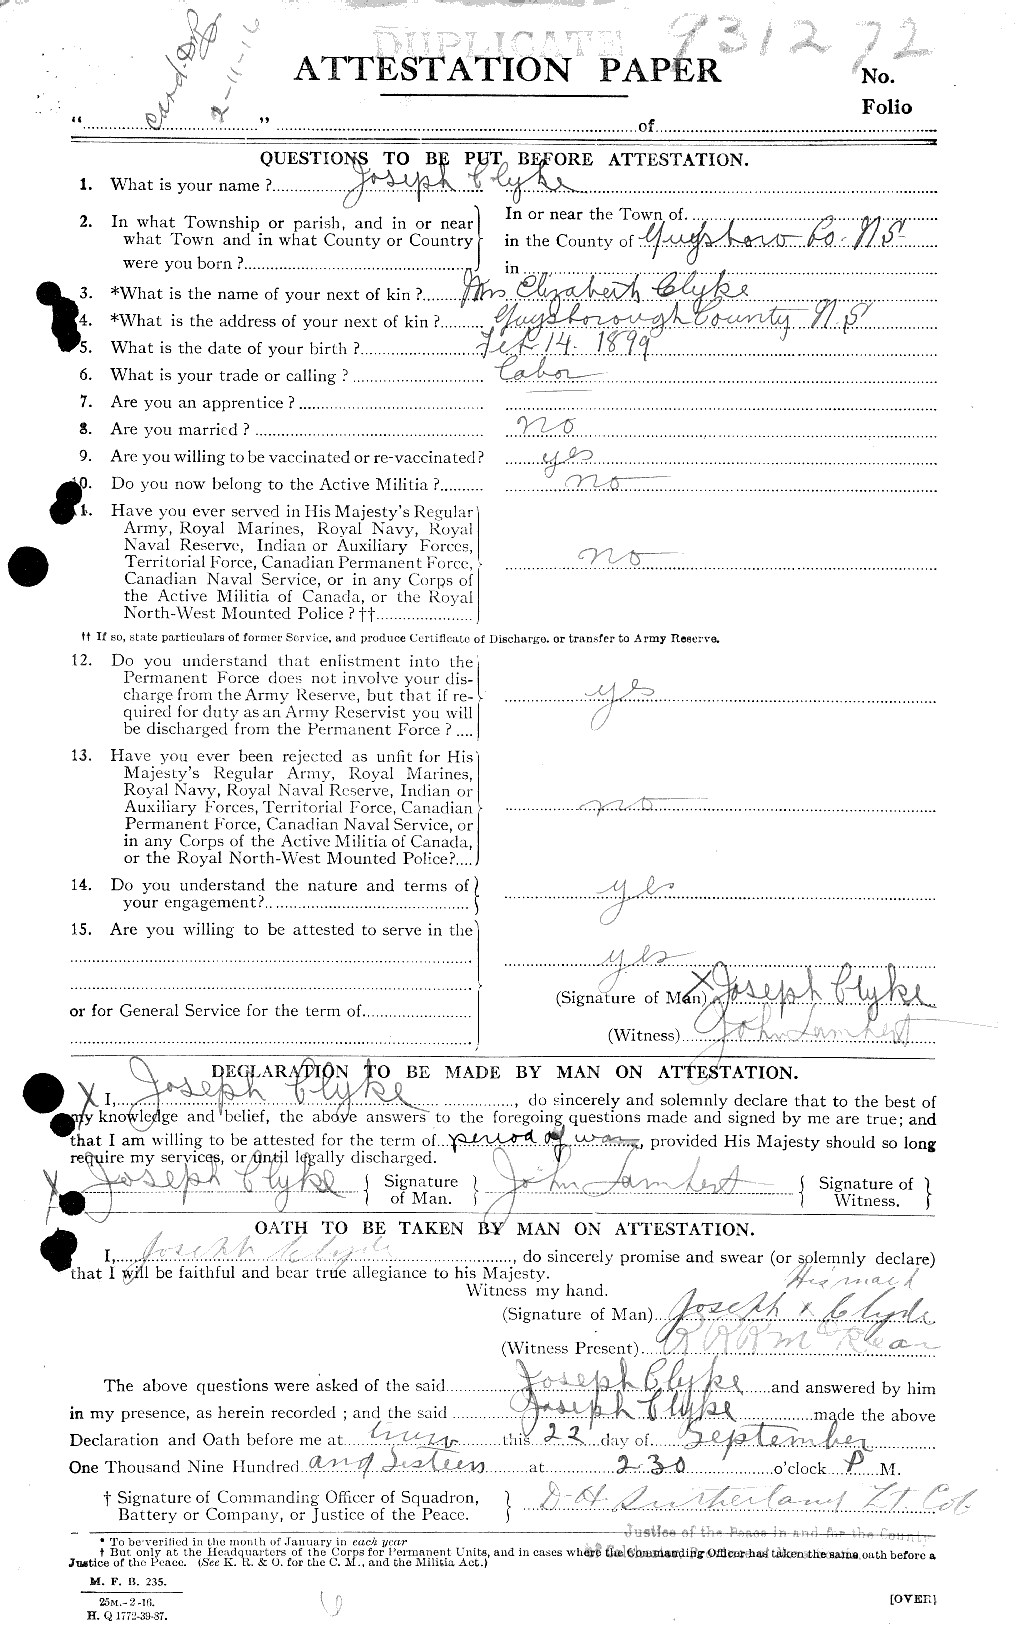 Personnel Records of the First World War - CEF 026323a